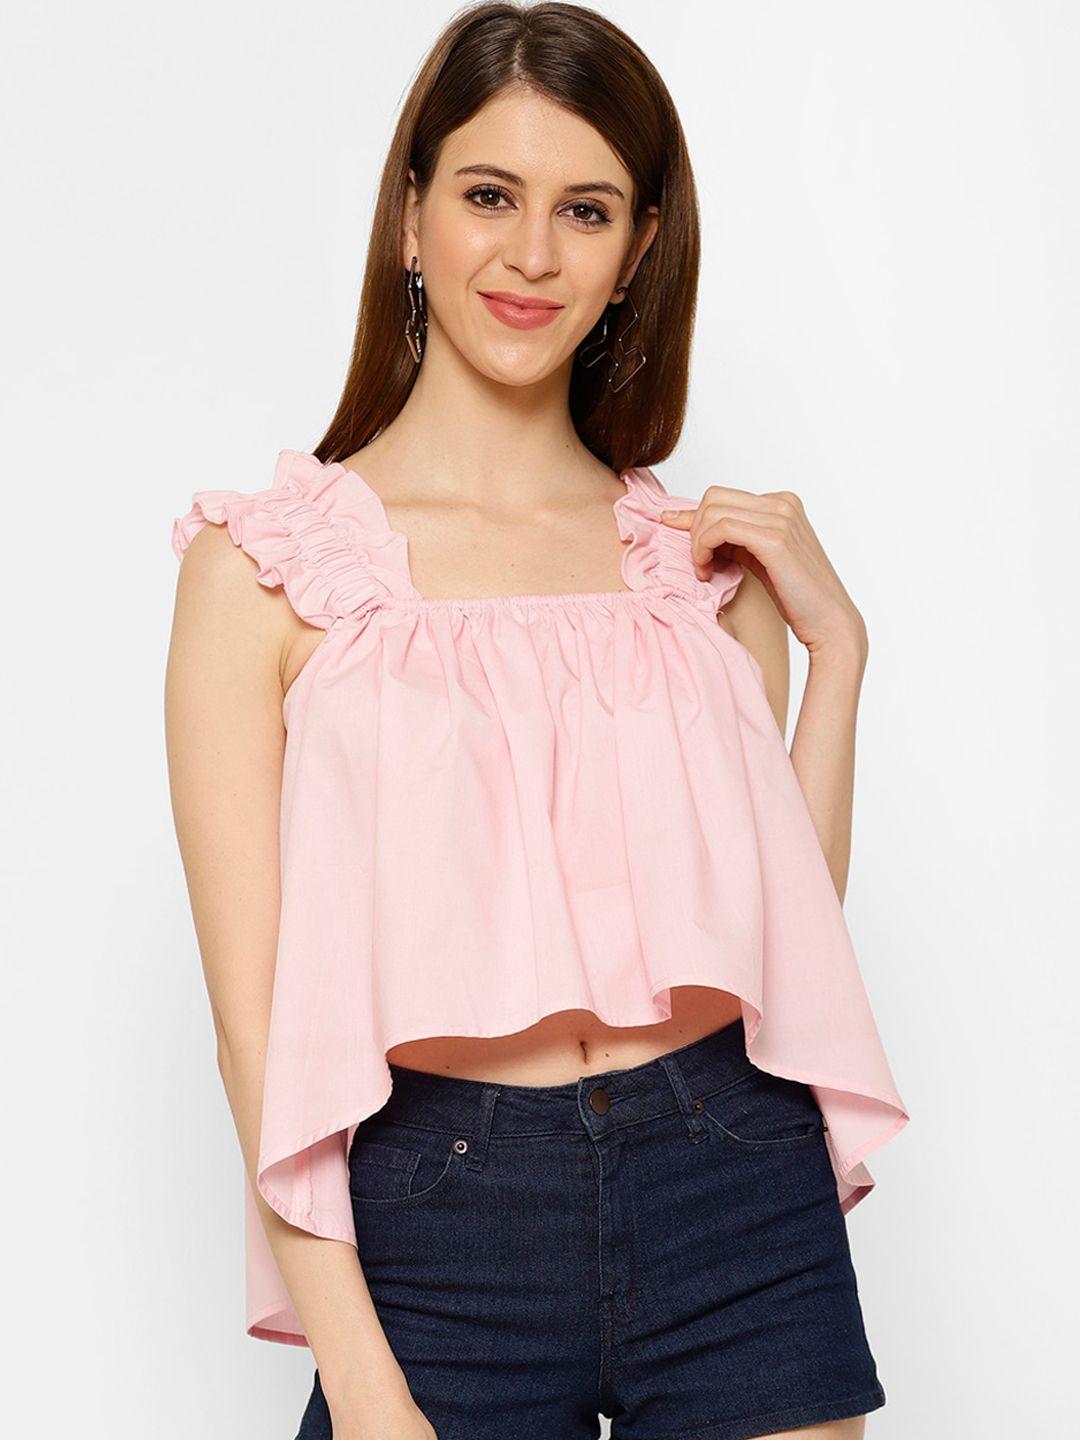 kassually women pink frilly shoulder high low top